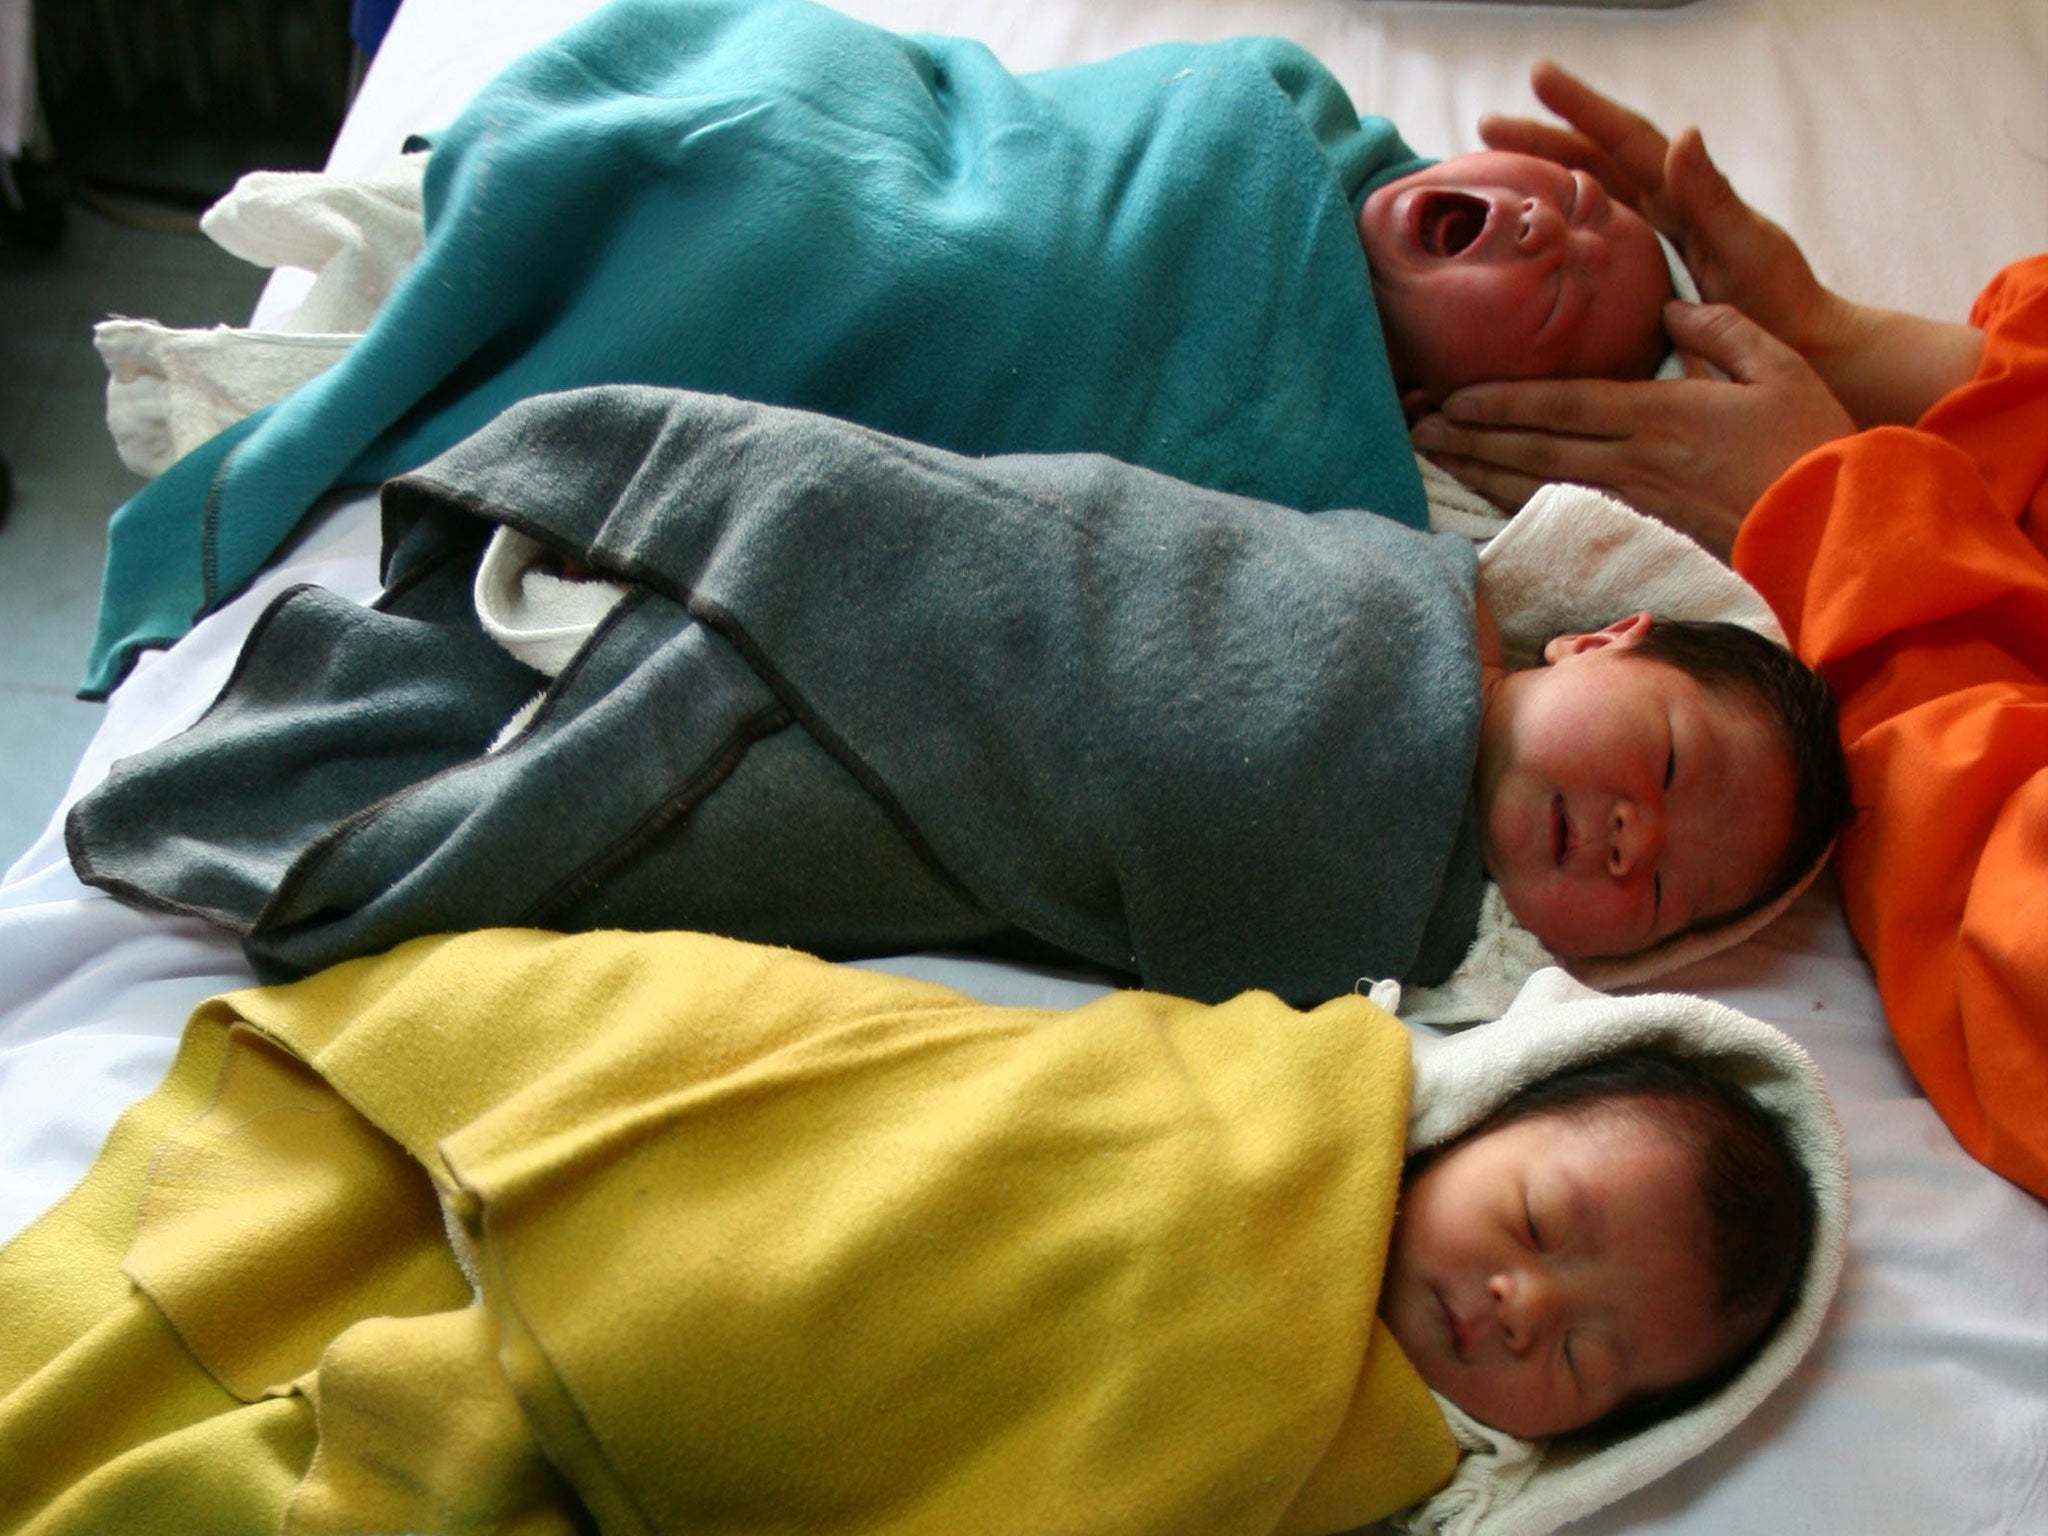 The Chinese government now wants to promote fertility, after 40 years of limits on family sizes